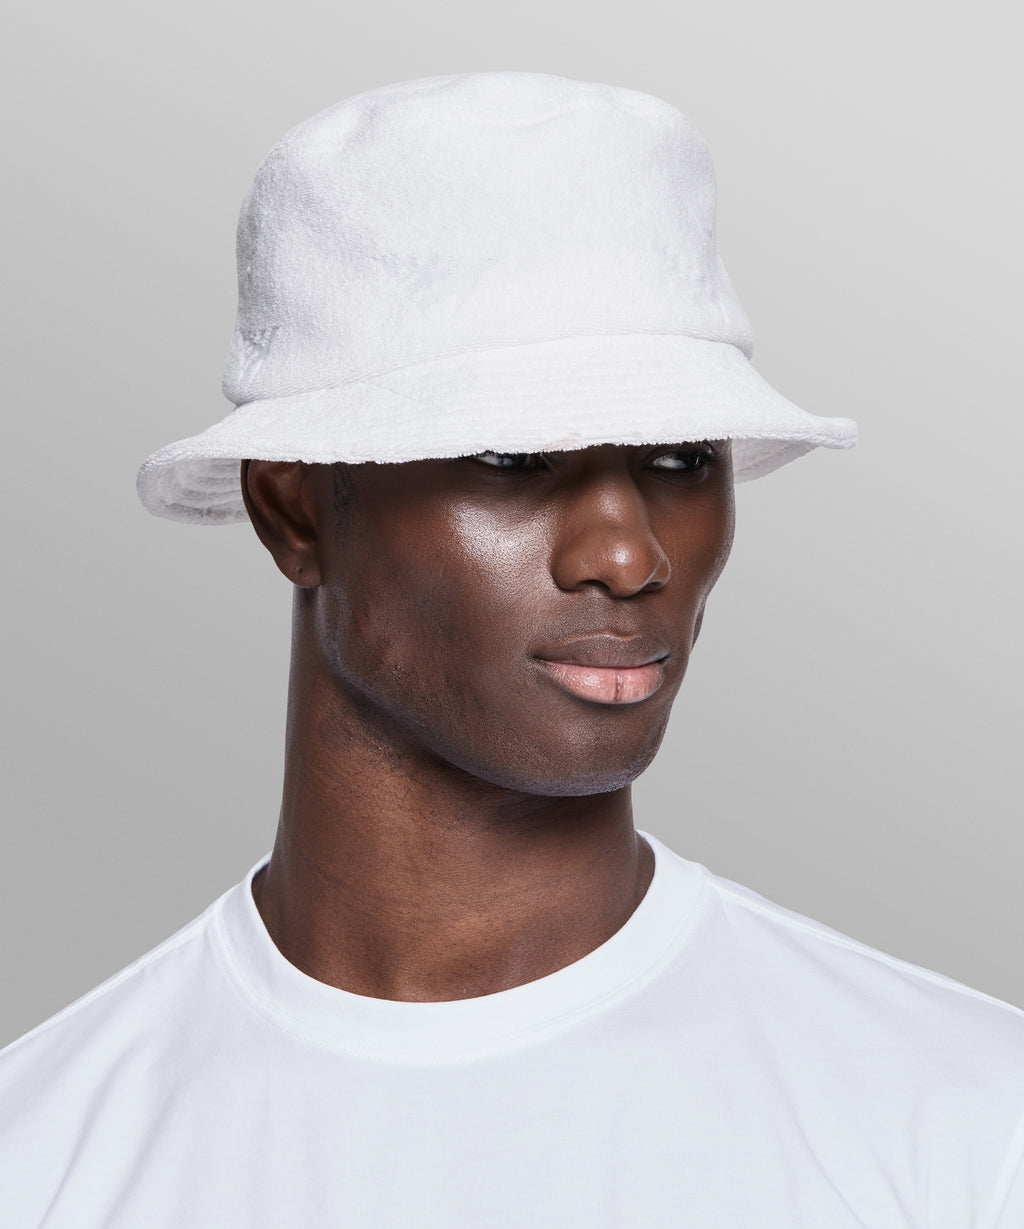  Male model wearing Paper Planes Jacquard Terry Cloth Bucket Hat color White.